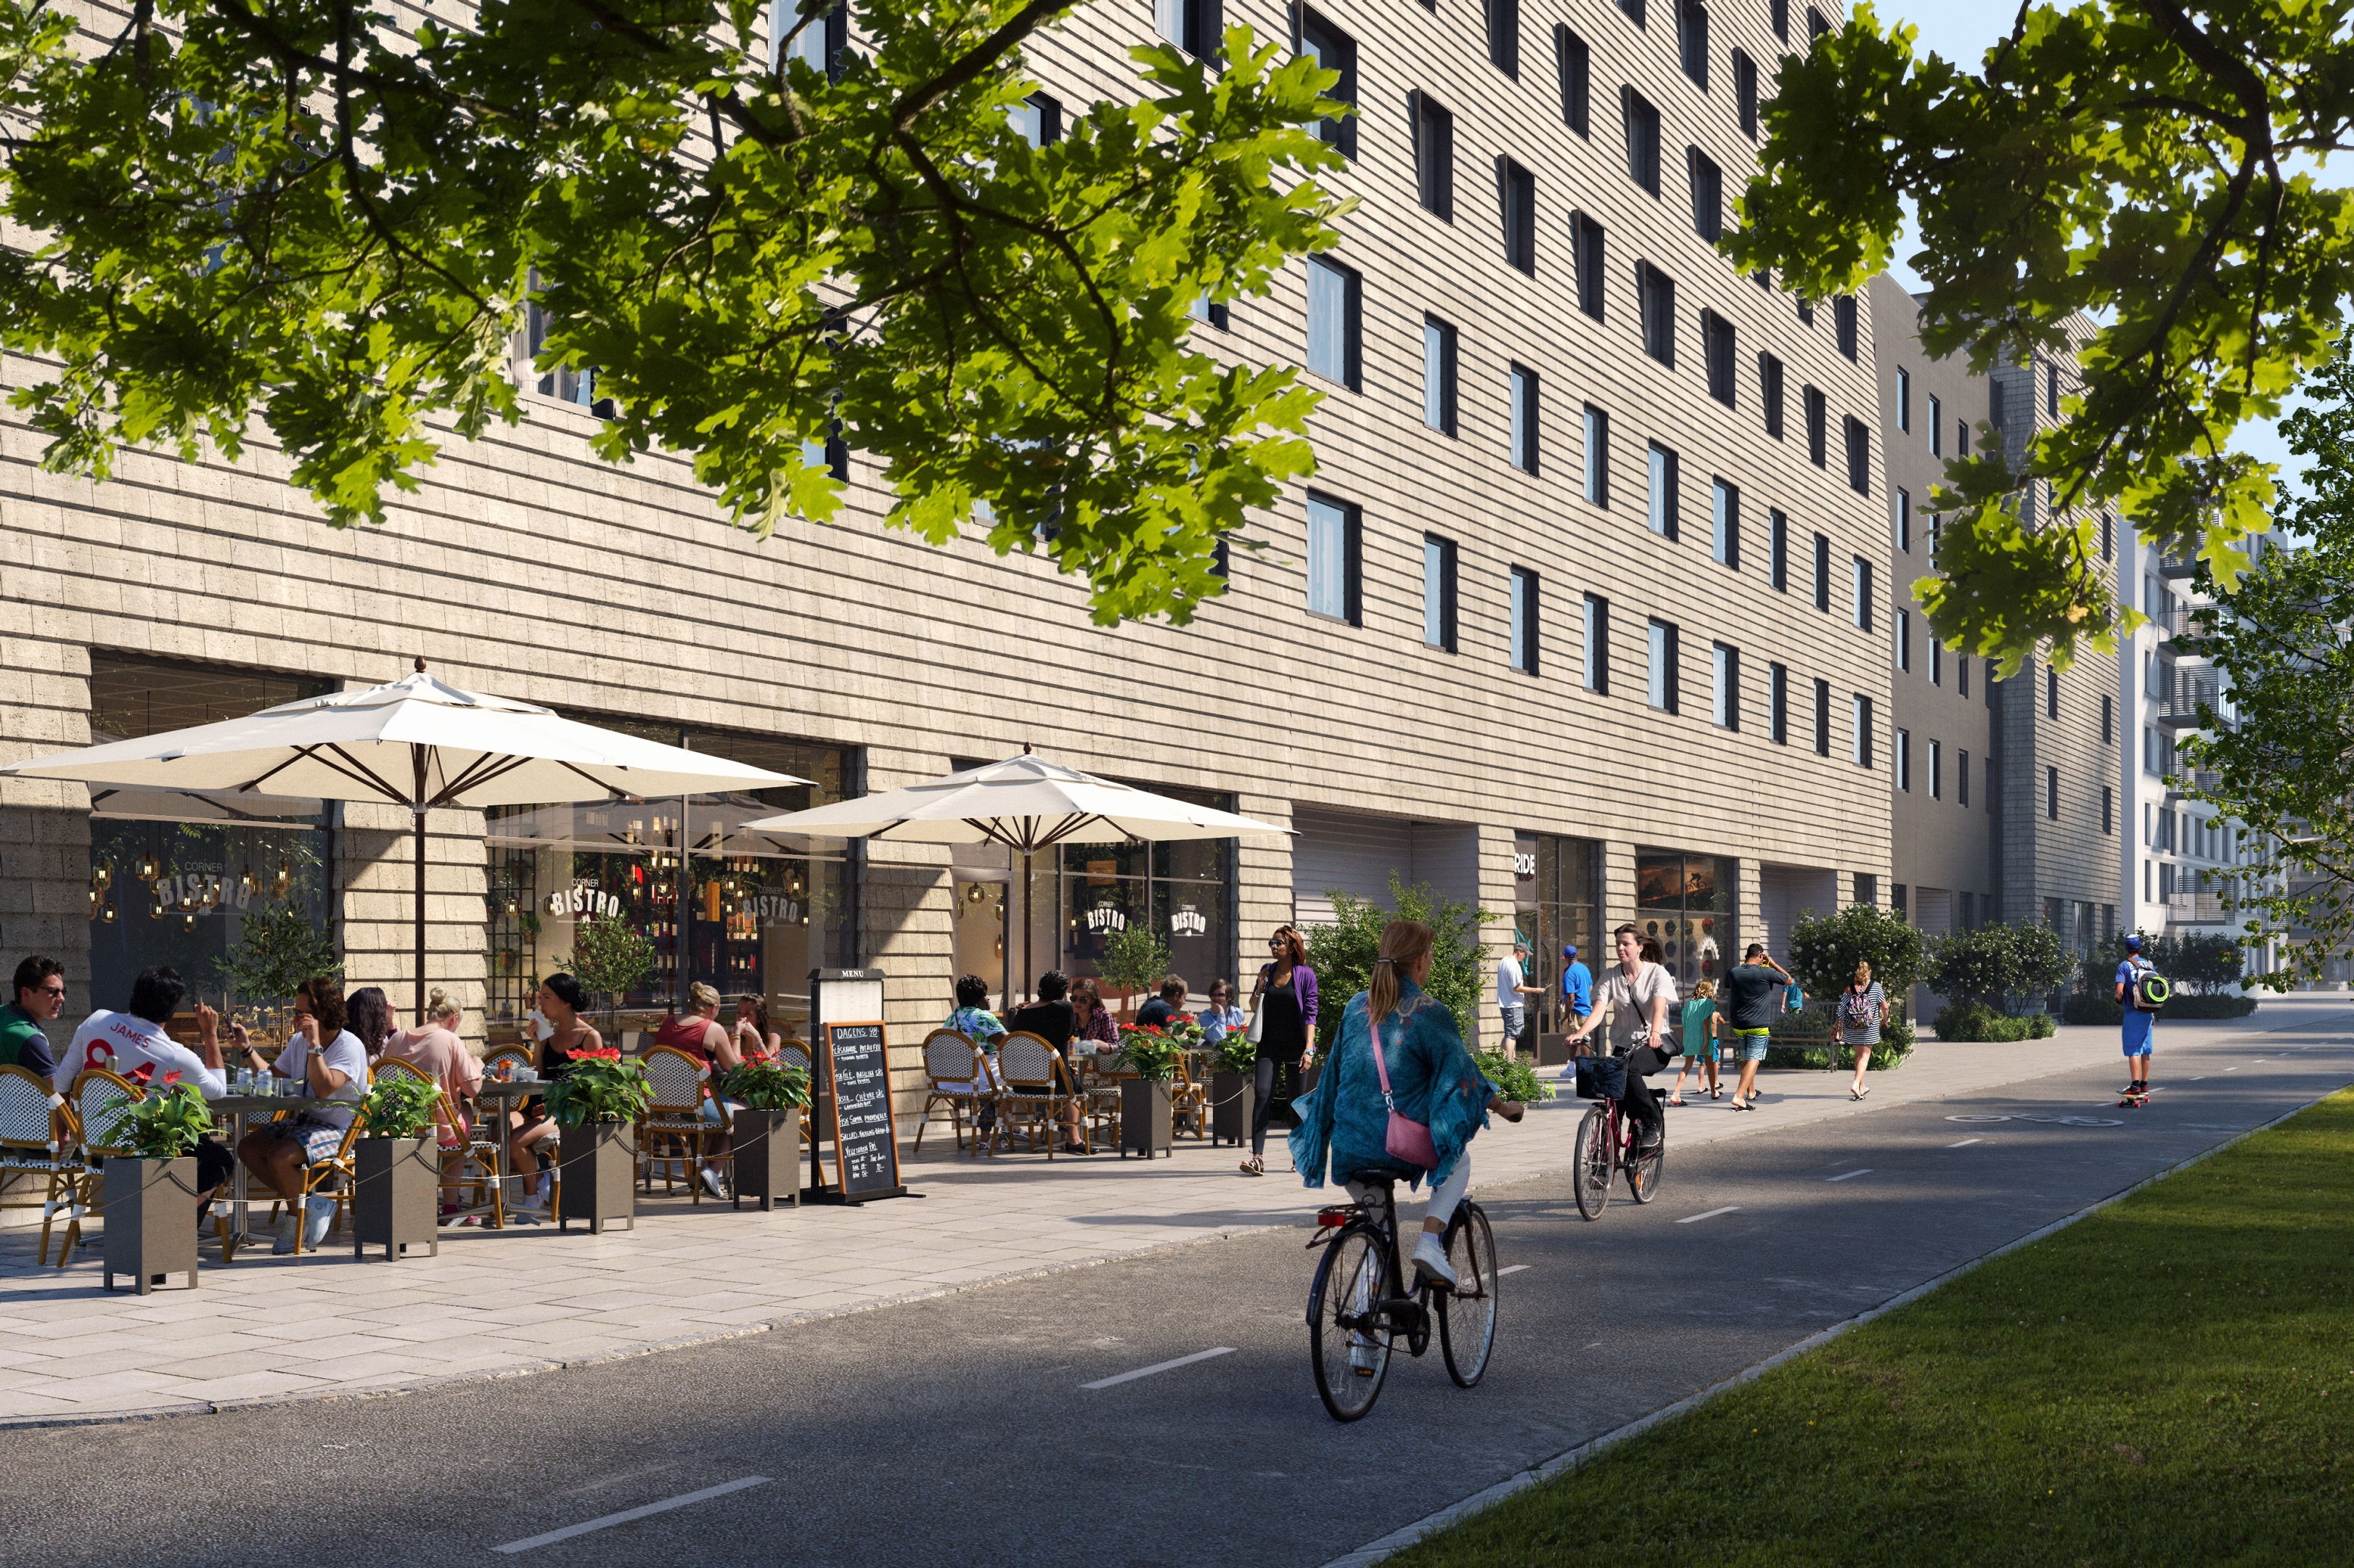 Architectural visualization of Lindholmshamnen for Riksbyggen. A image of the exterior of a residential building with a bike lane in front of the building in daylight.